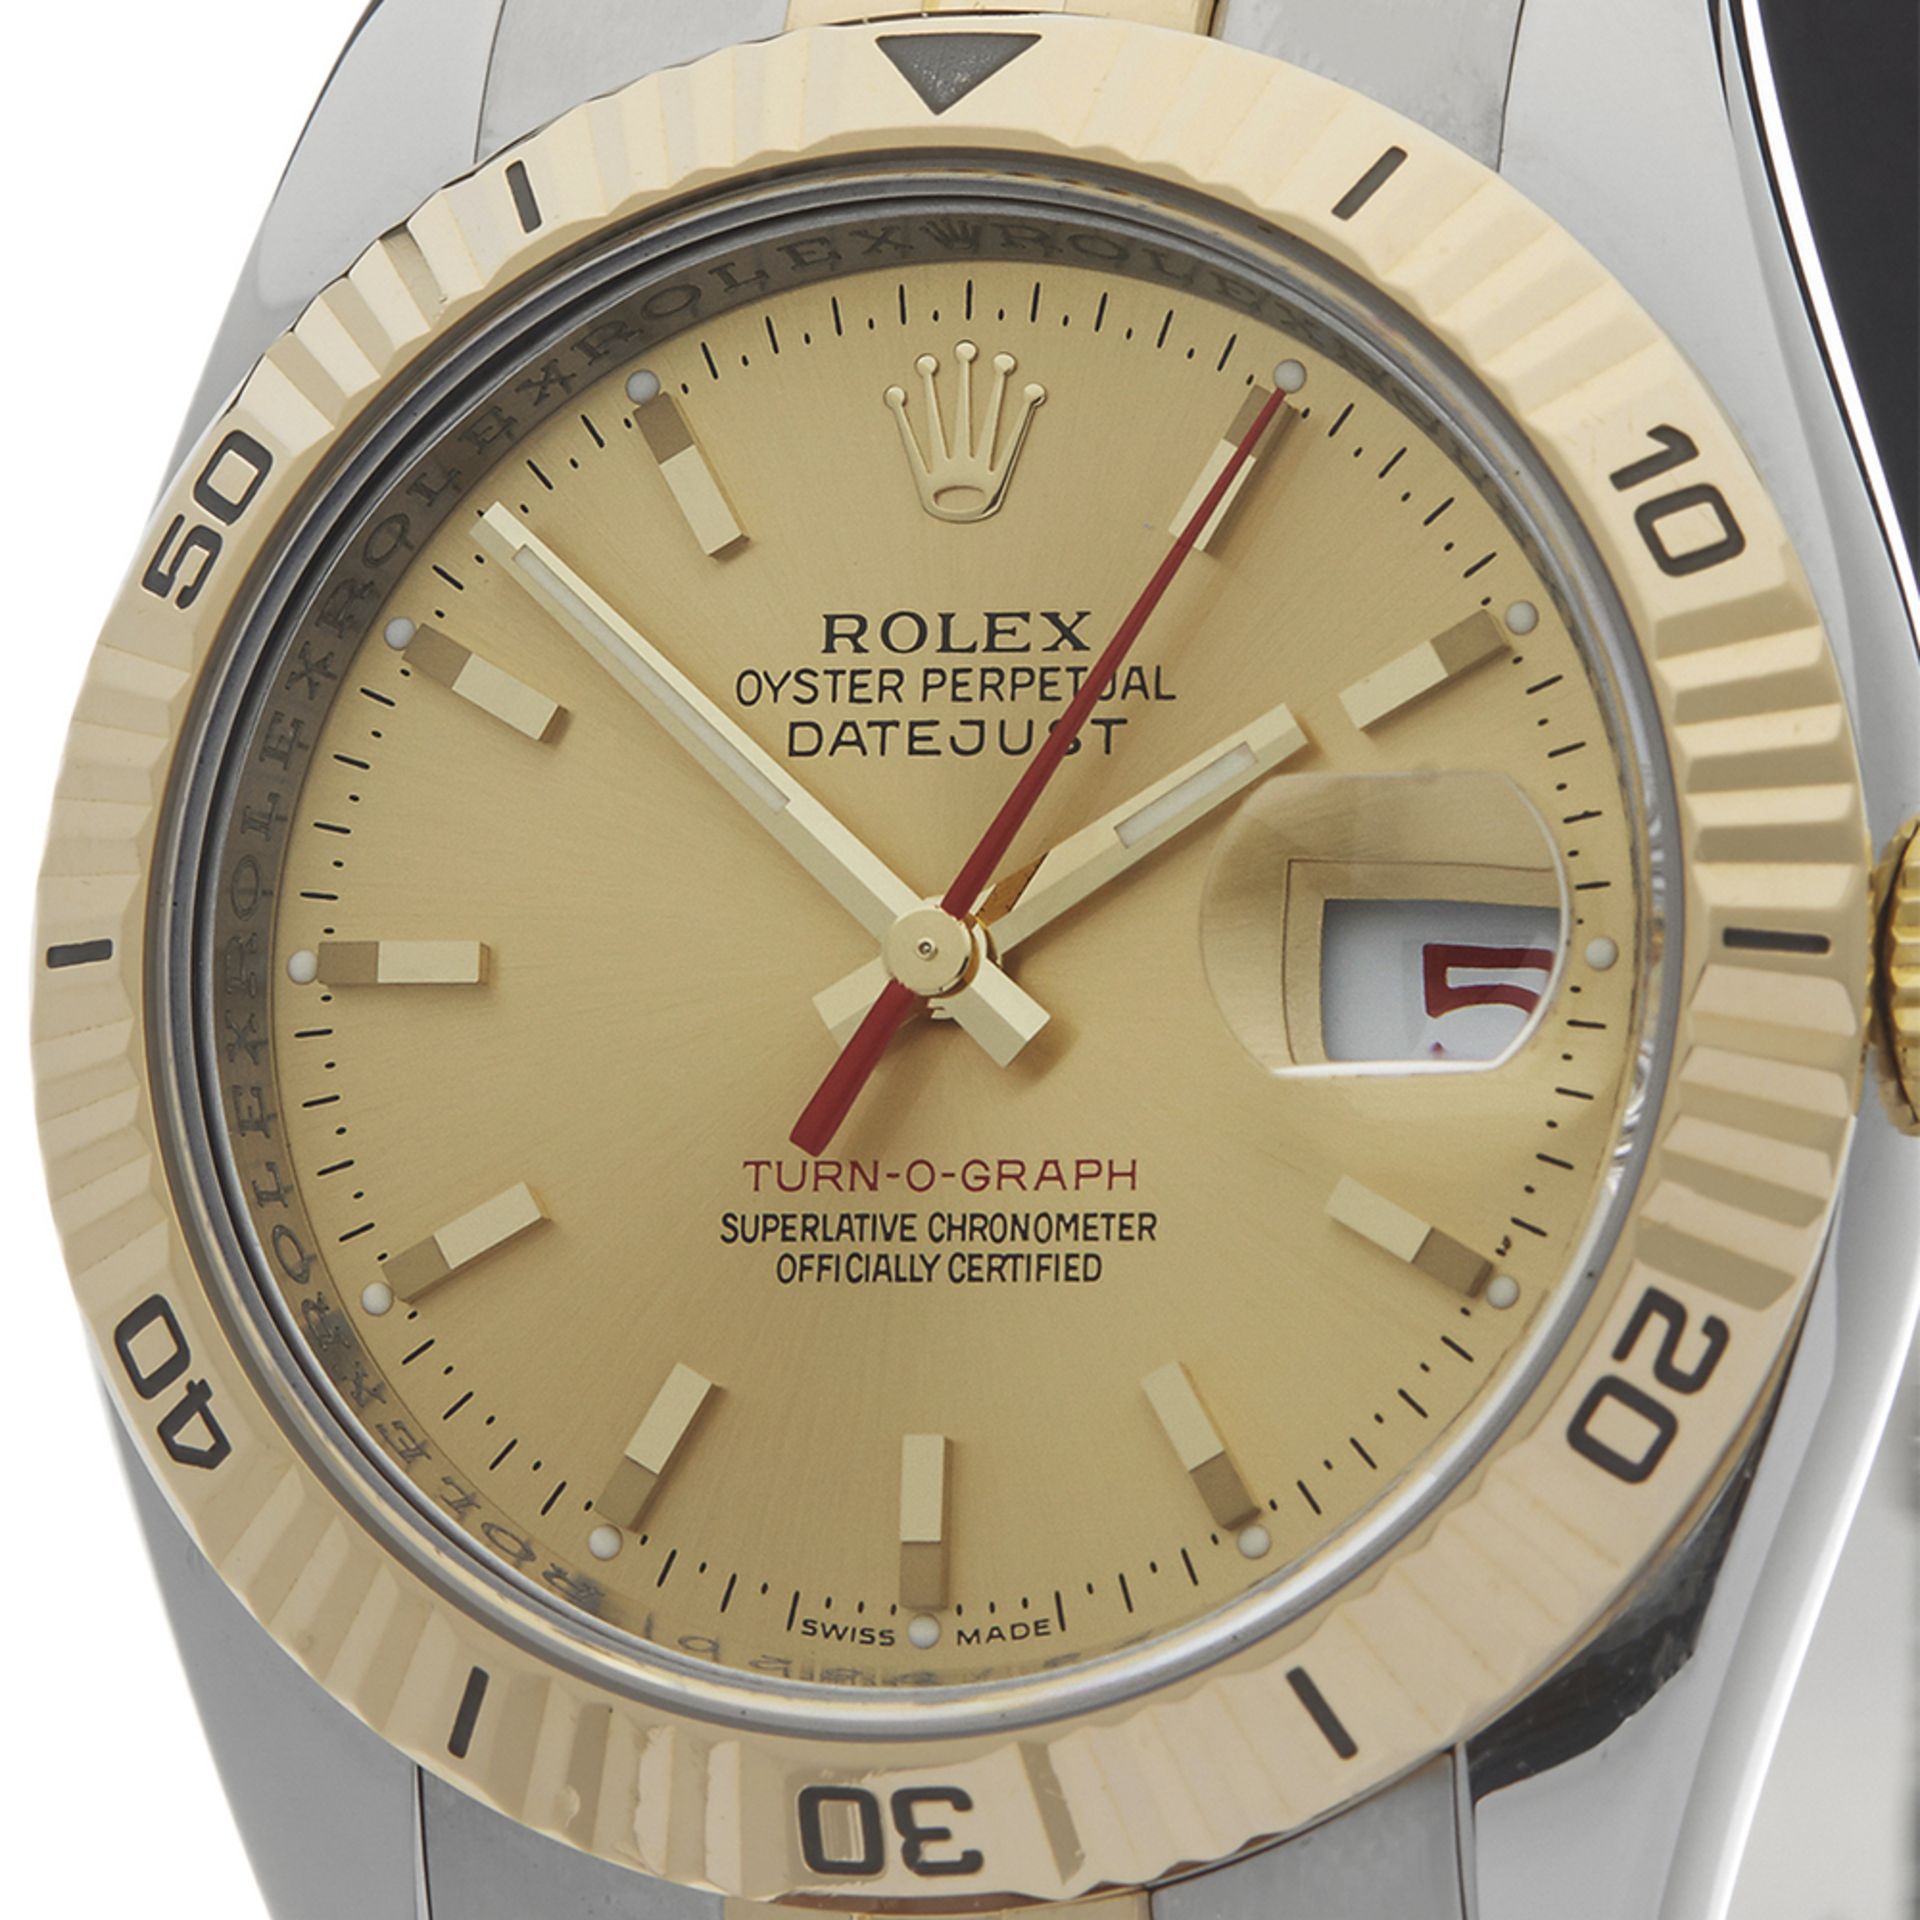 Datejust Turn-o-graph 36mm Stainless Steel & 18k Yellow Gold - 116263 - Image 3 of 9